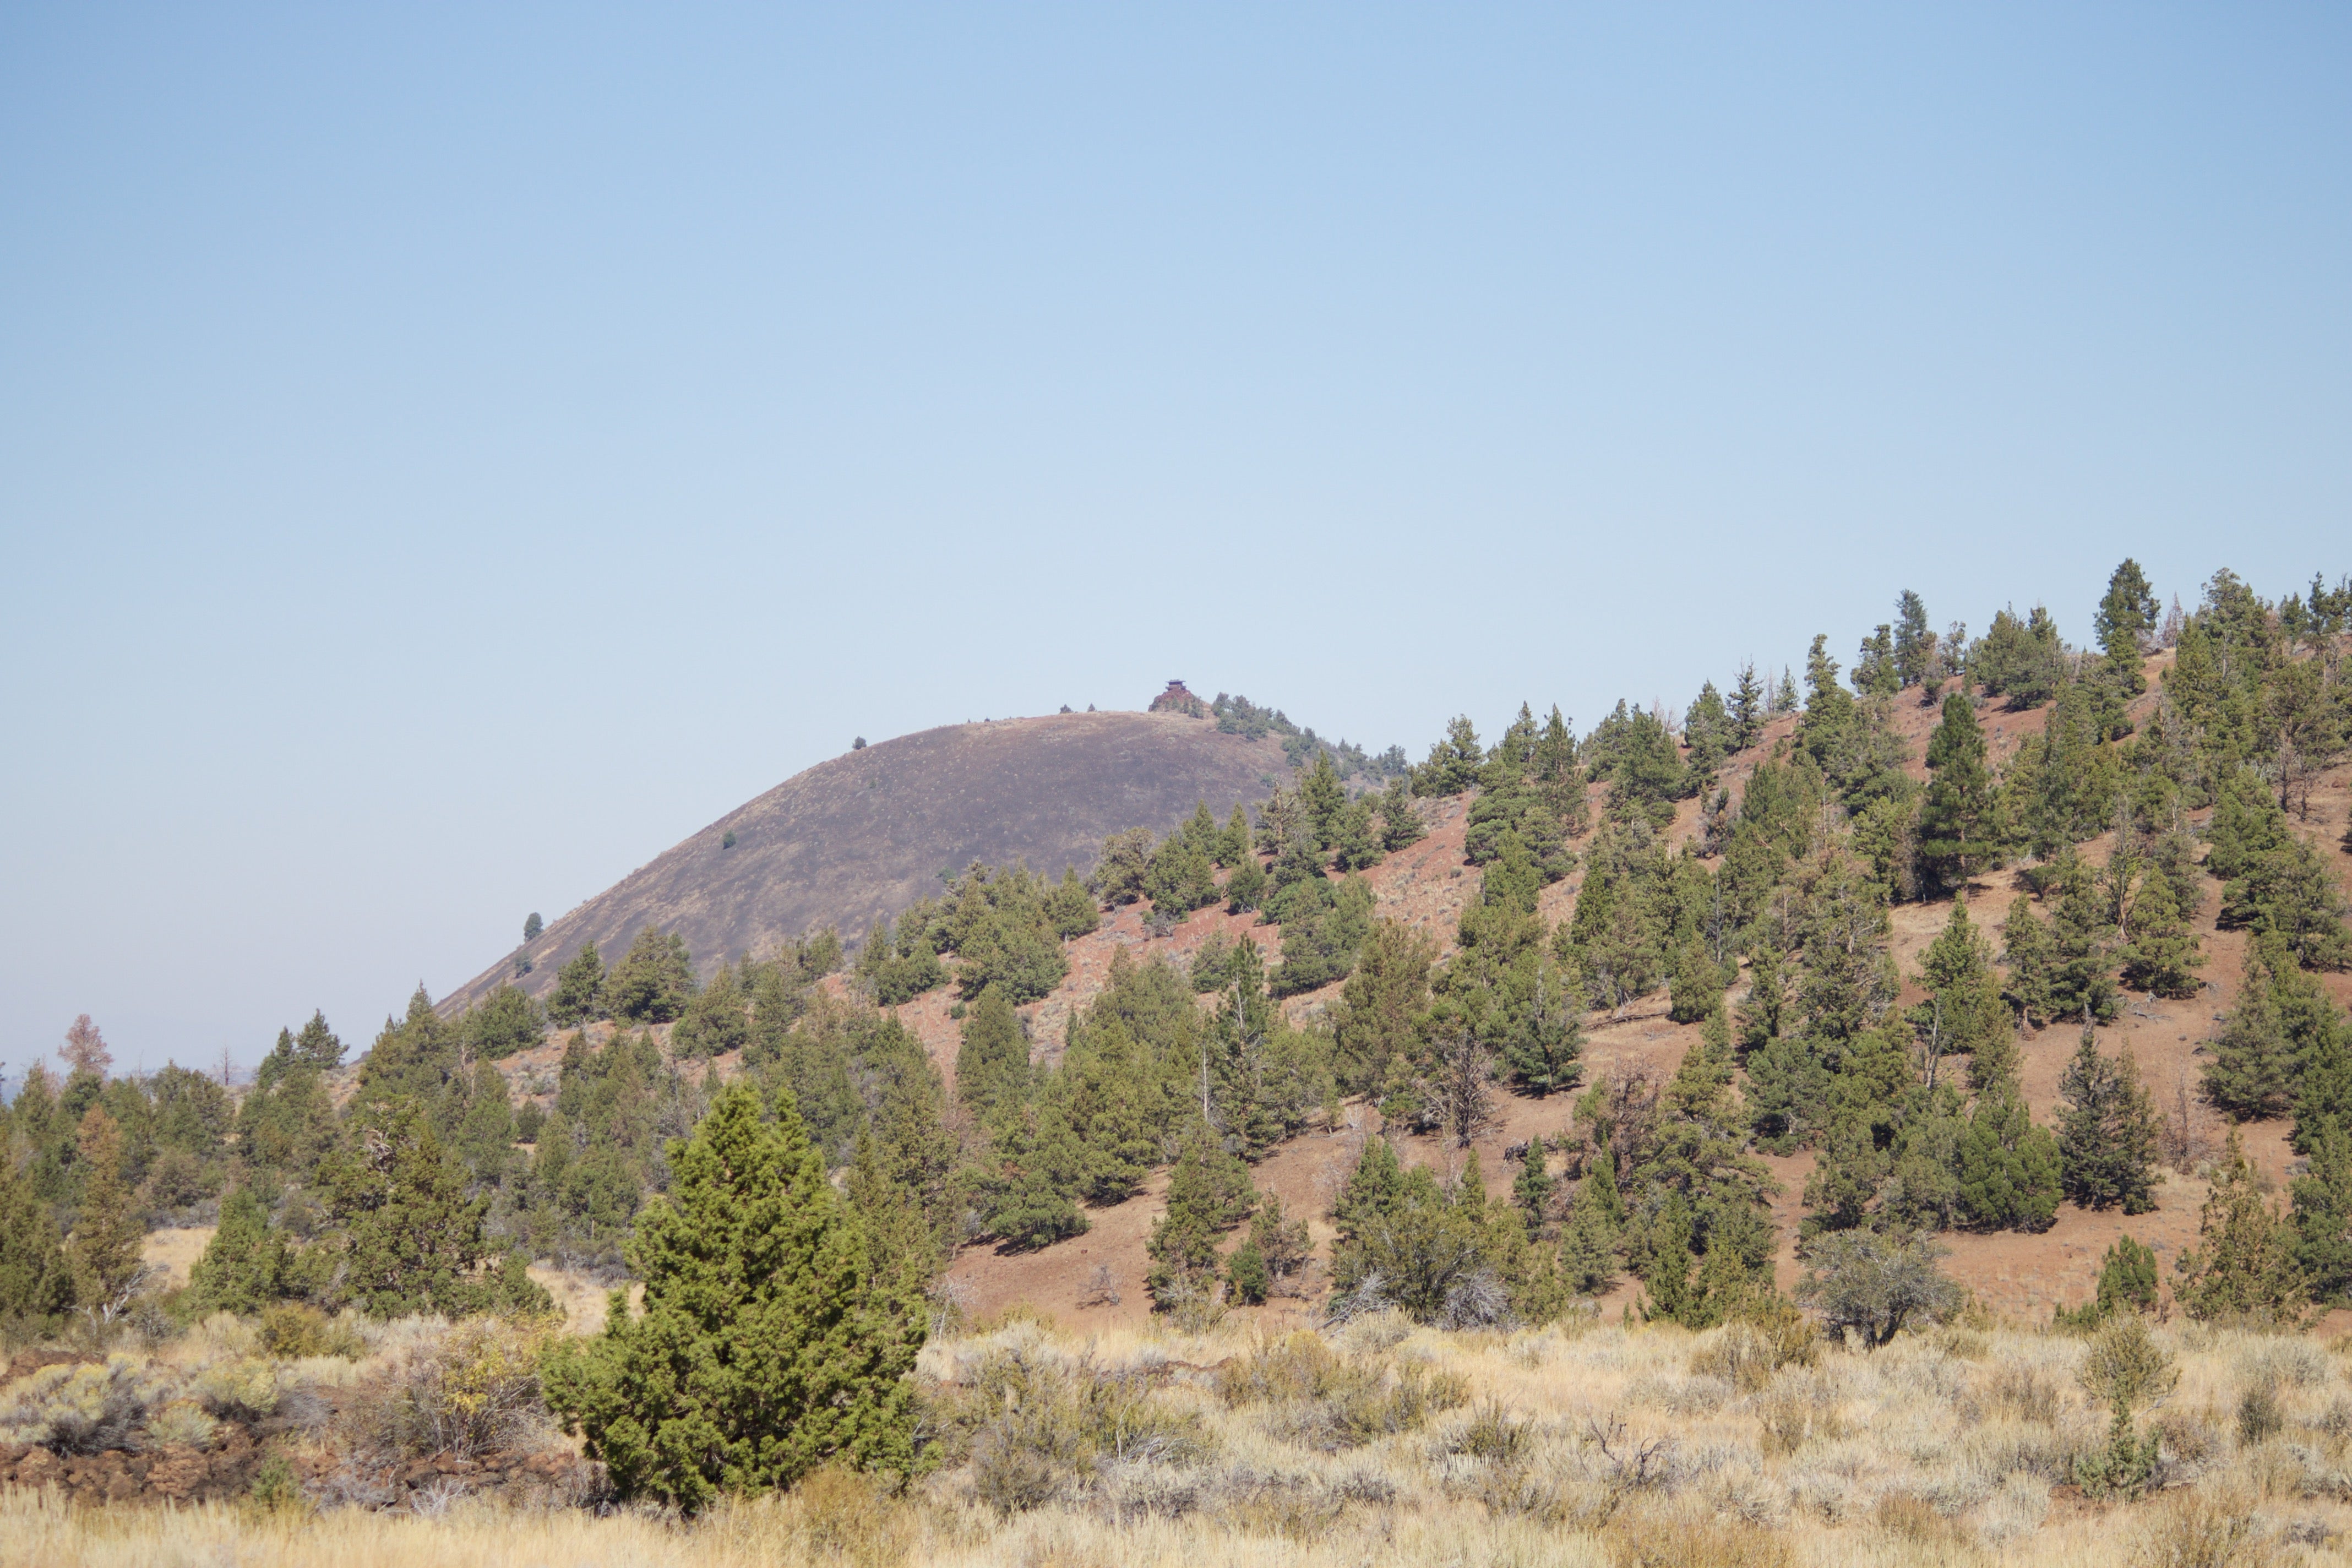 View of Schonchin Butte in Lava Beds Natl Monument